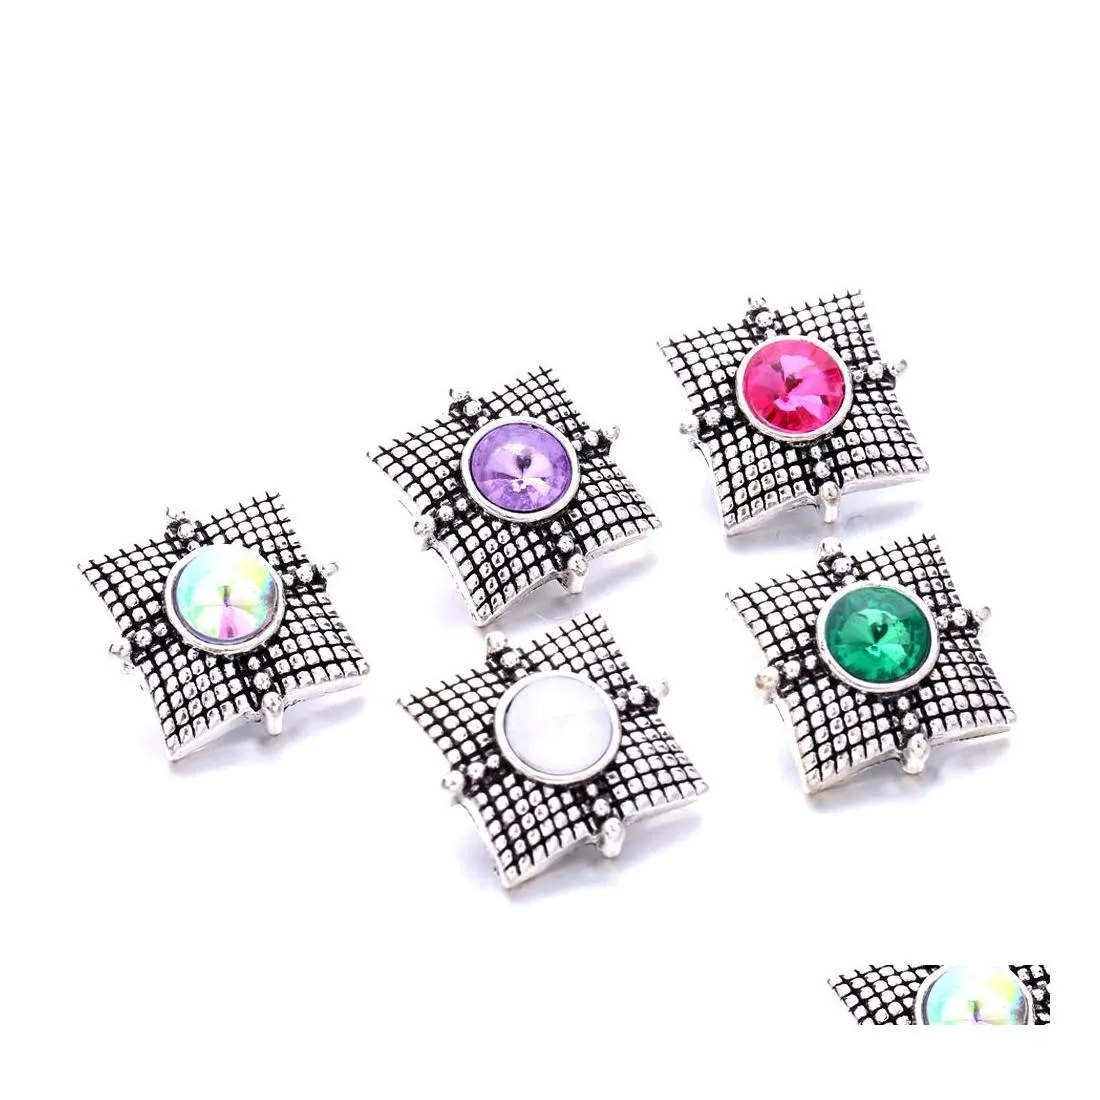 CAR DVR CLASPS HOOKS Vintage Square Shape Snap Button Jewelry Findings Rhinestone 18mm Metal Snaps Knappar Diy Necklace Armband Smycken DH0YW